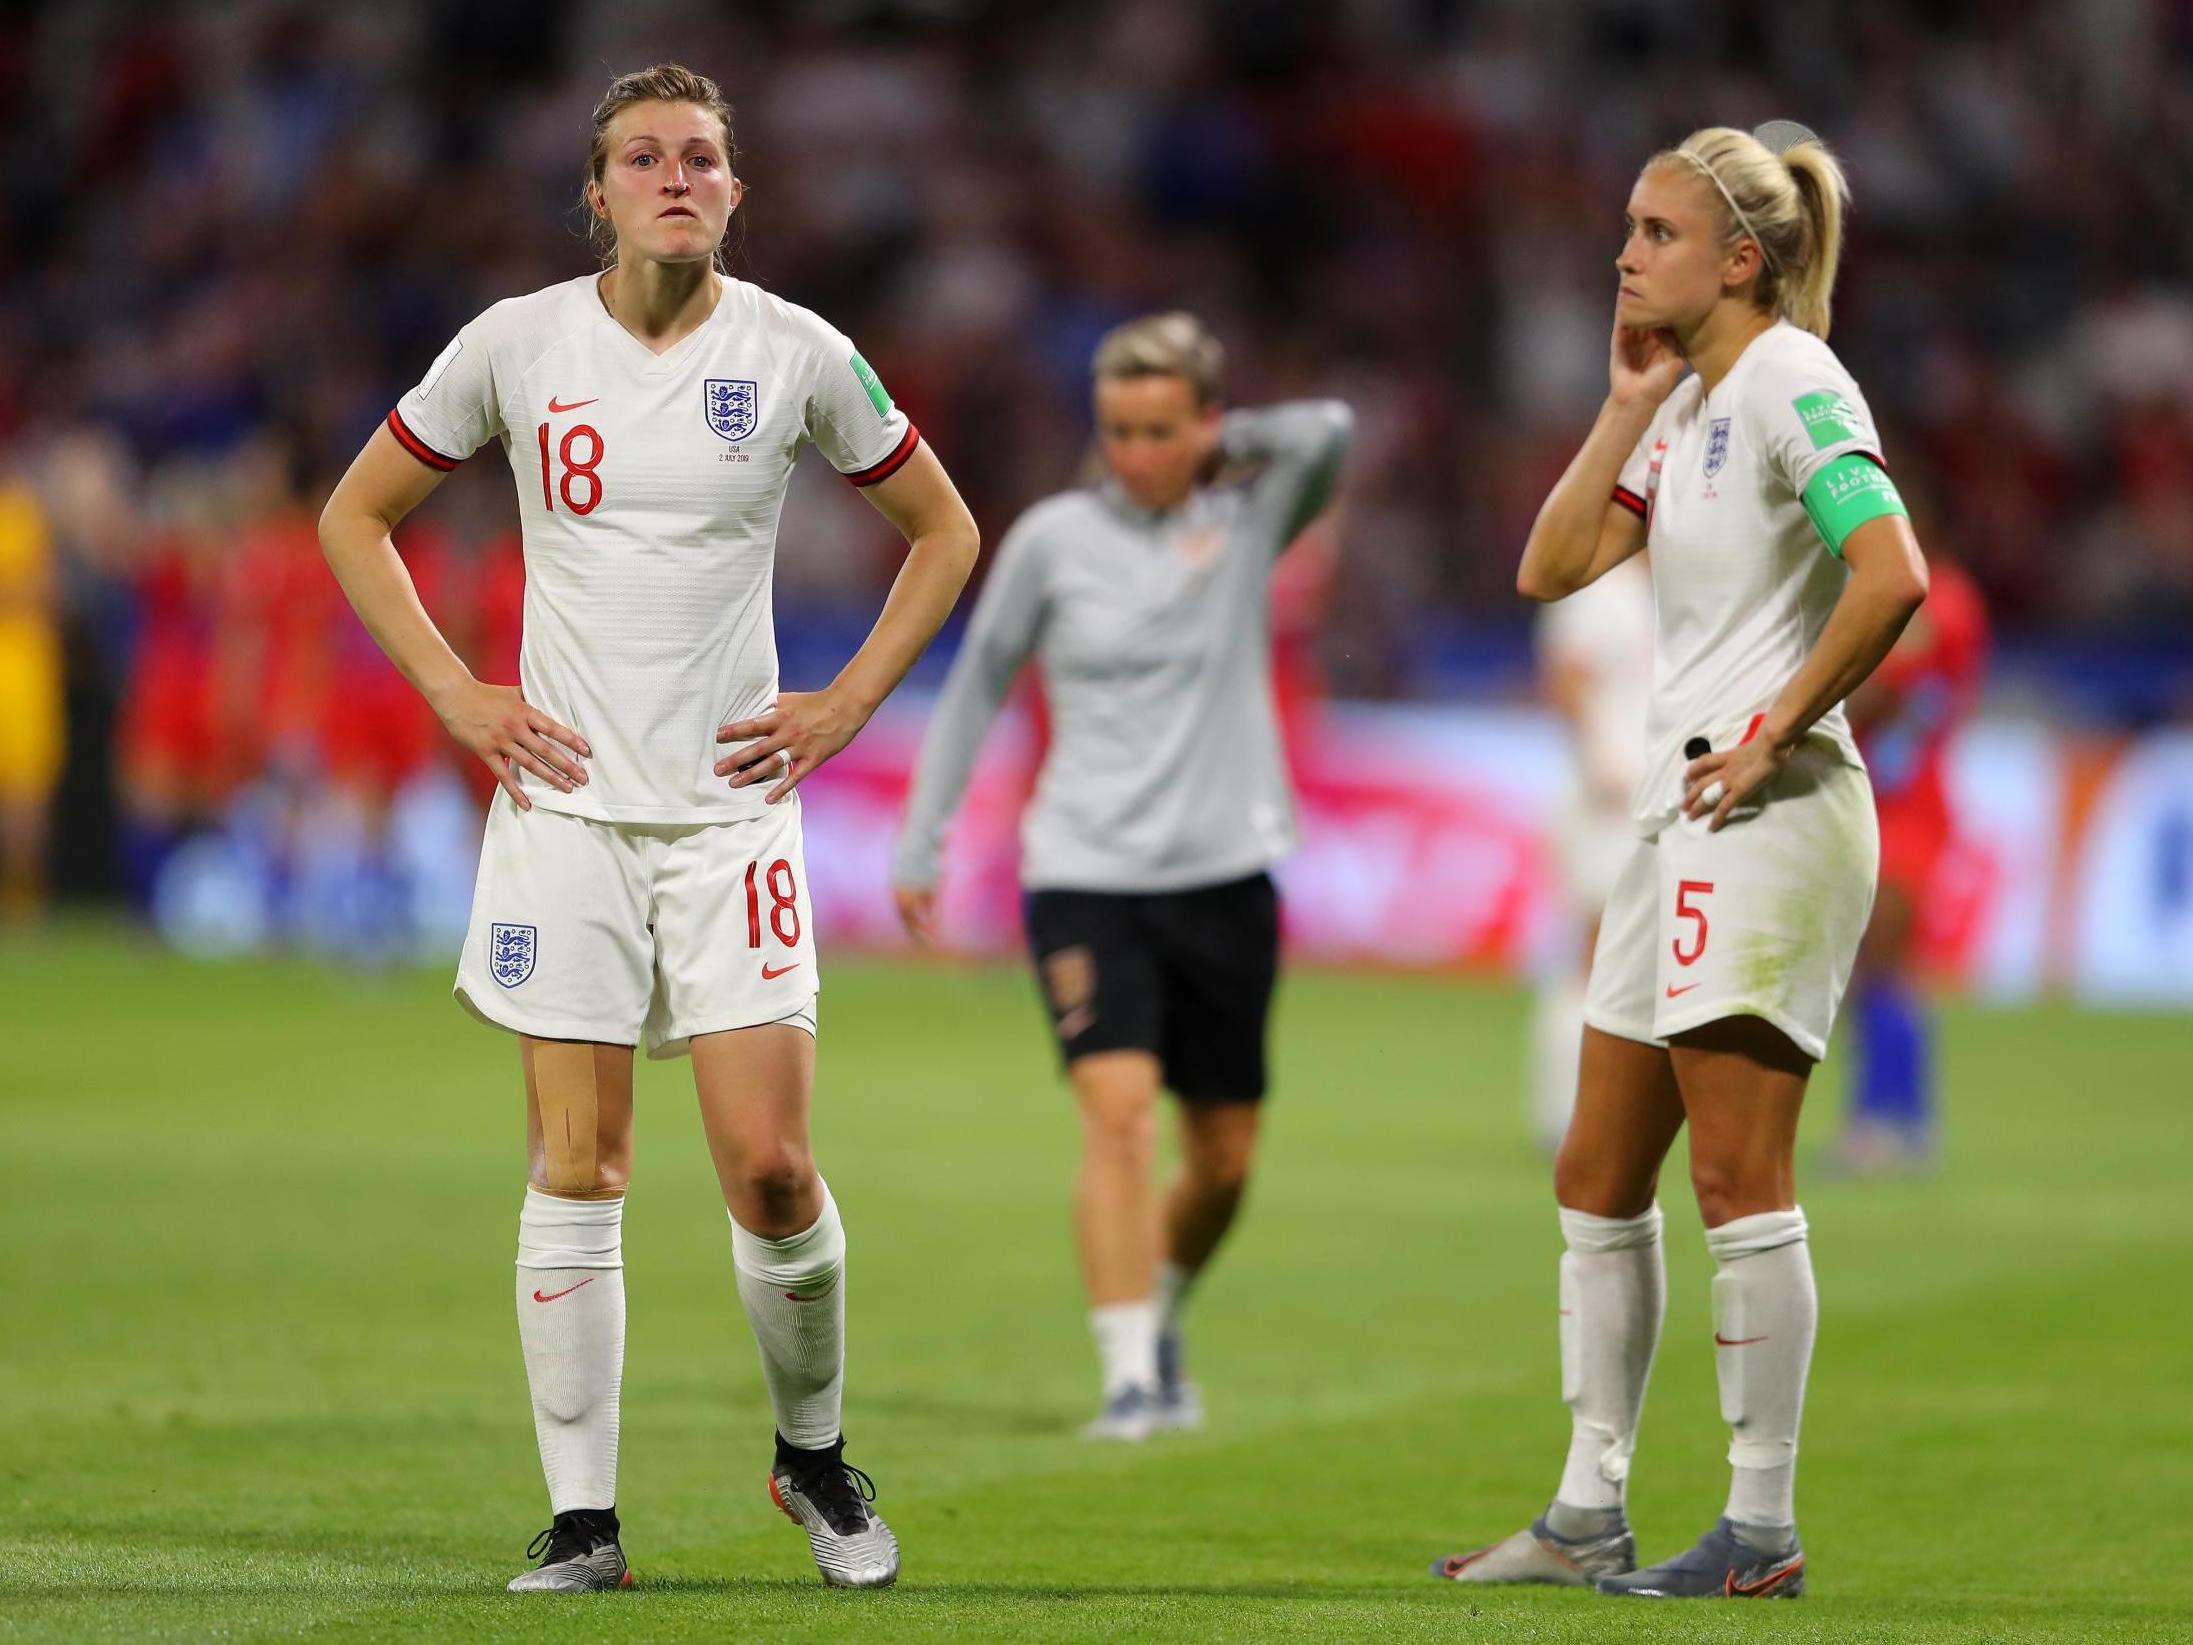 England vs USA: Emotional Ellen White devastated yet proud following England's Women's World Cup exit